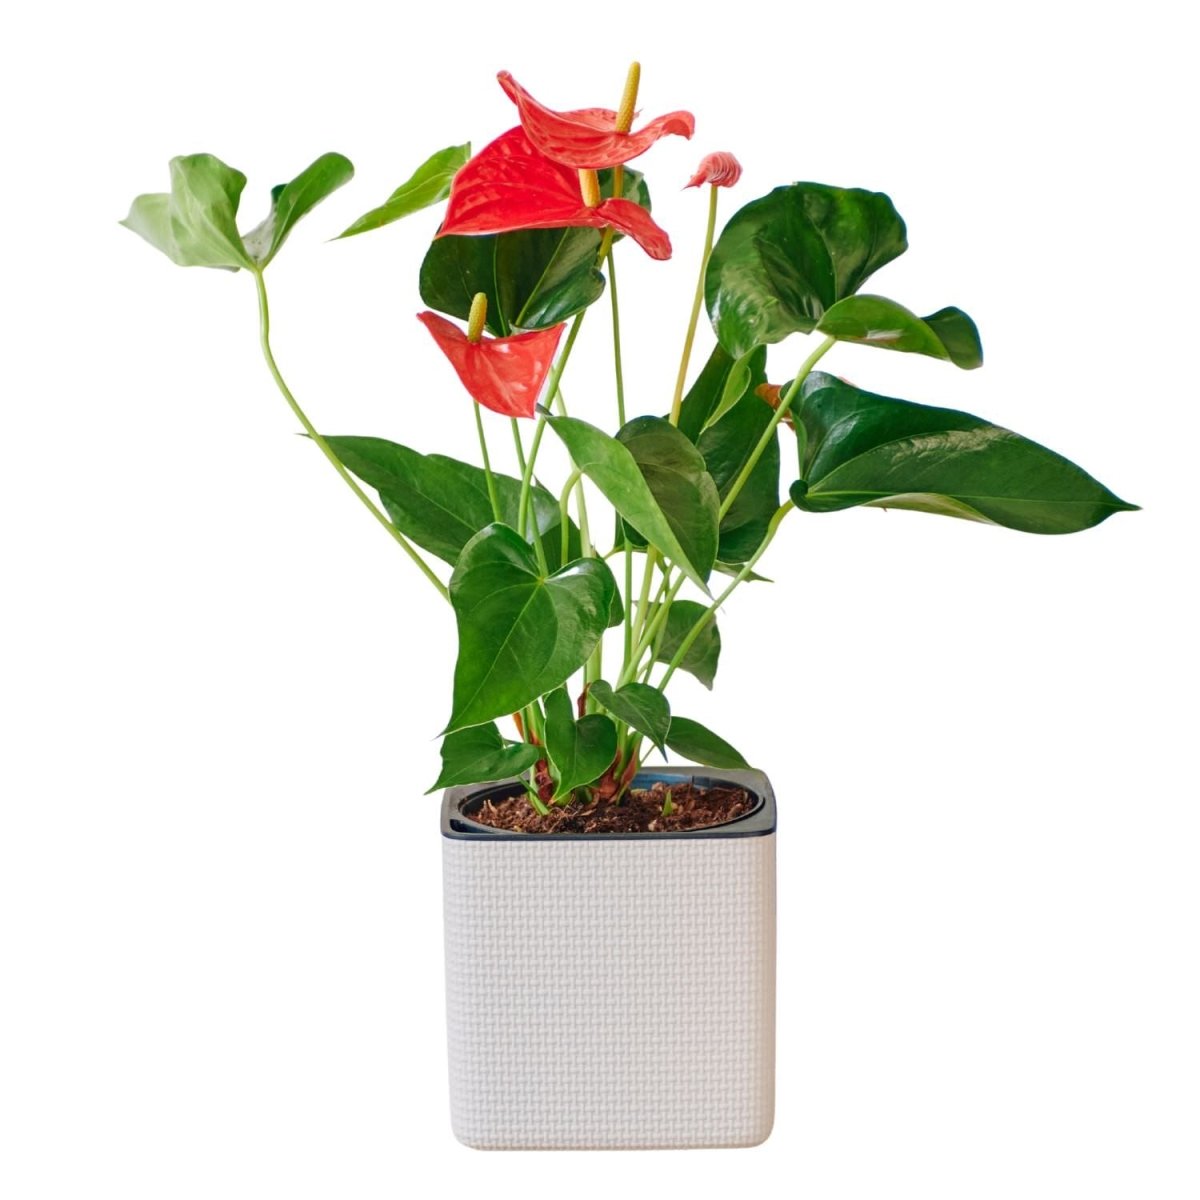 Anthurium Placed In Lechuza Cube 16 Planter - Sand Brown - My City Plants